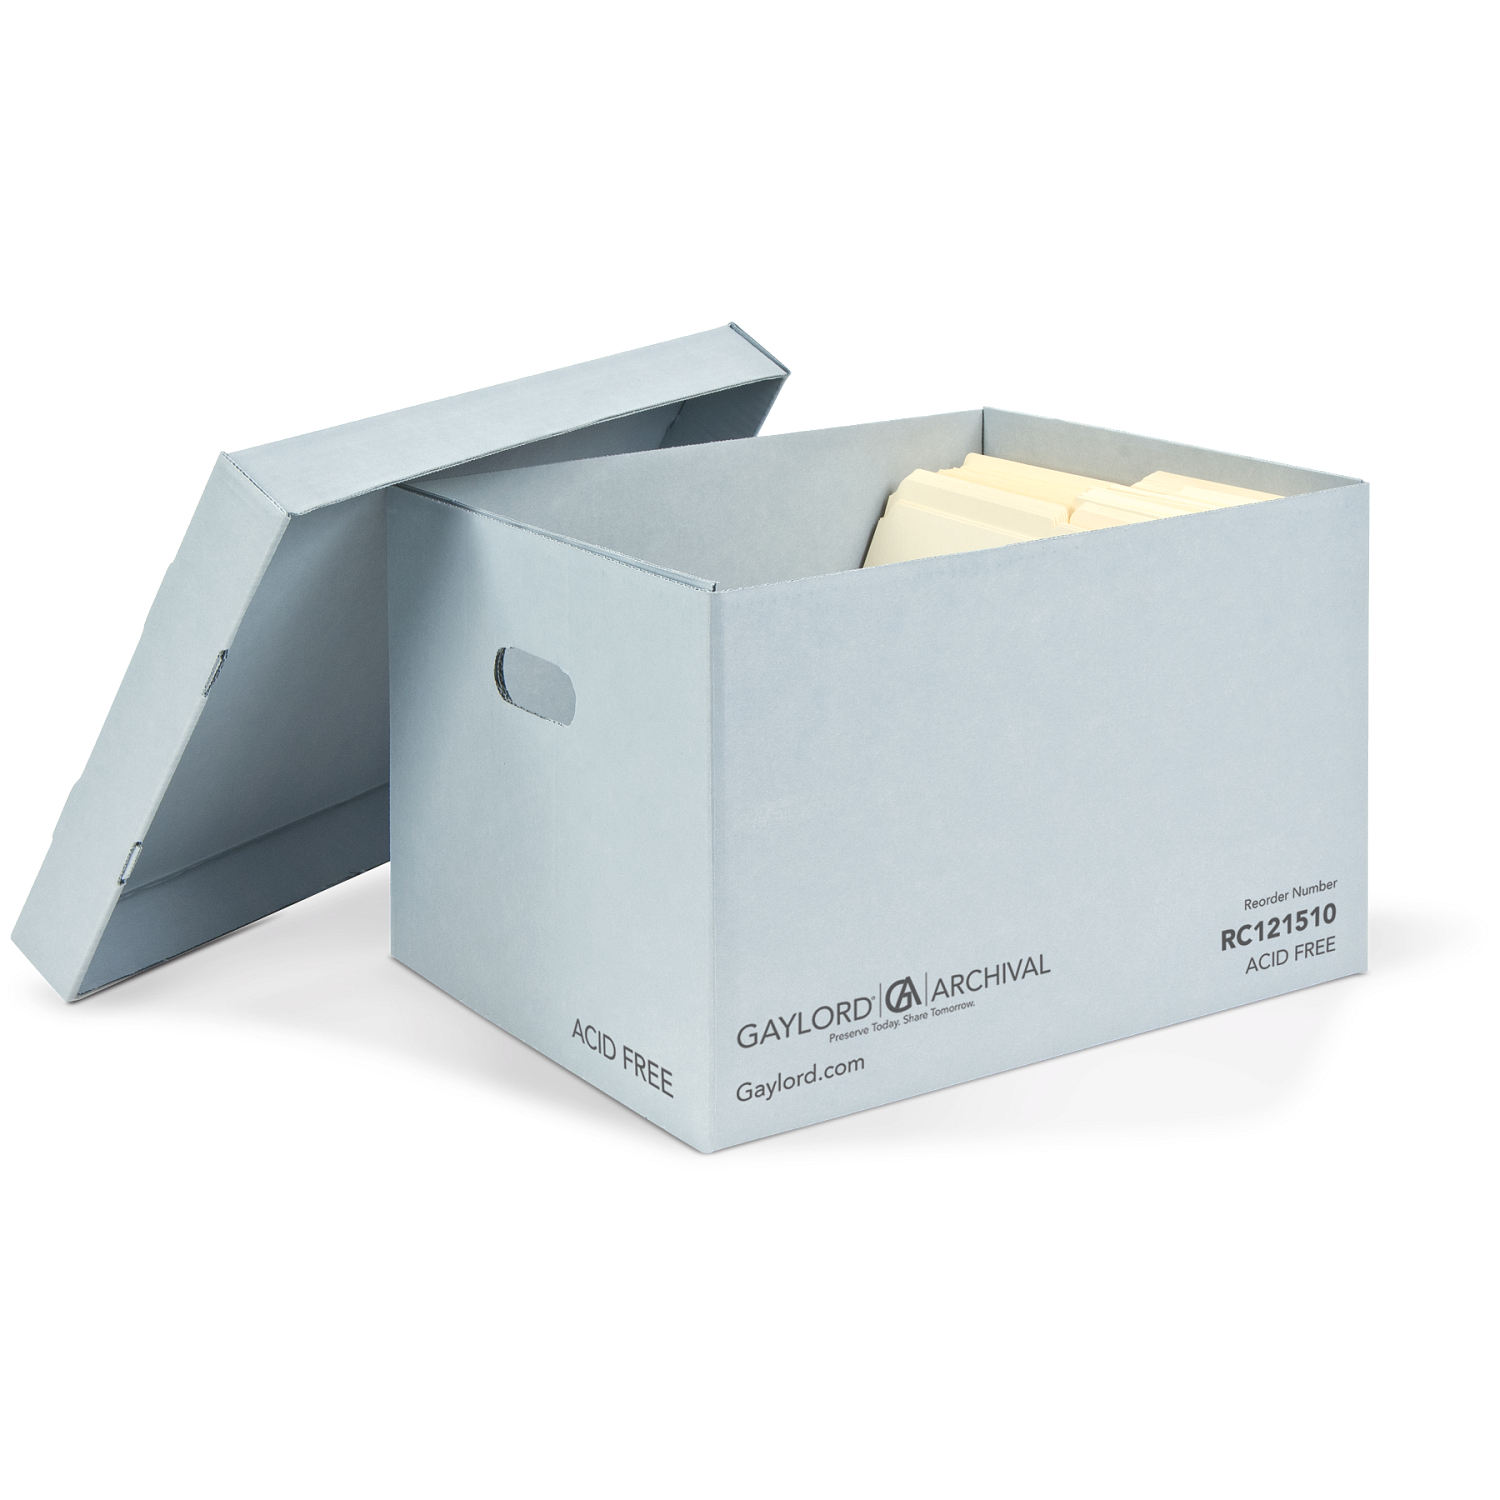 Gaylord Archival® Blue Classic Record Storage Carton with Handholds, Record Storage Cartons, Document Preservation, Preservation